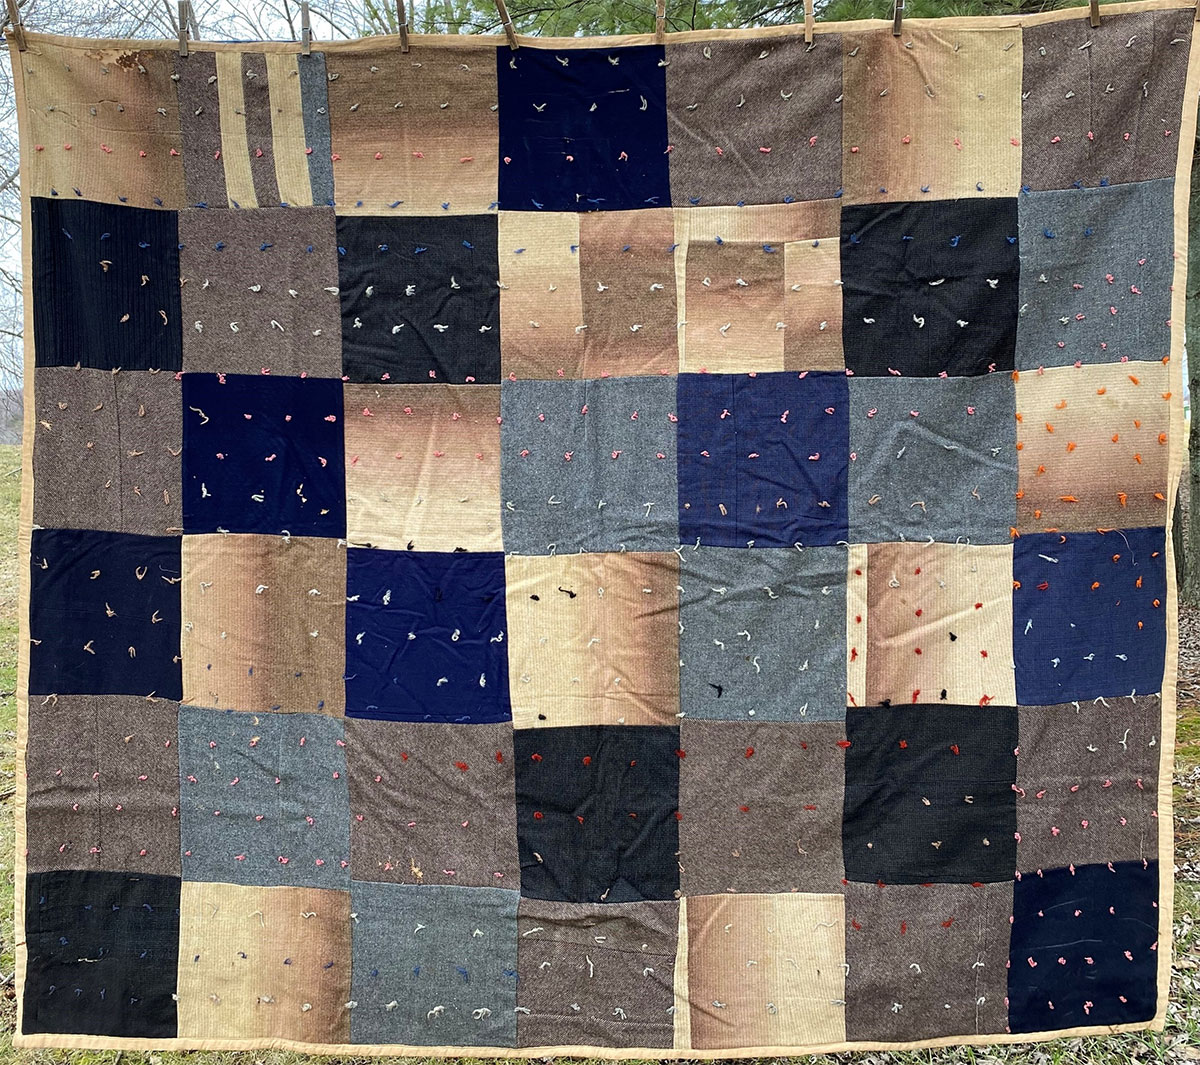 A quilt with a black, blue and beige square pattern.